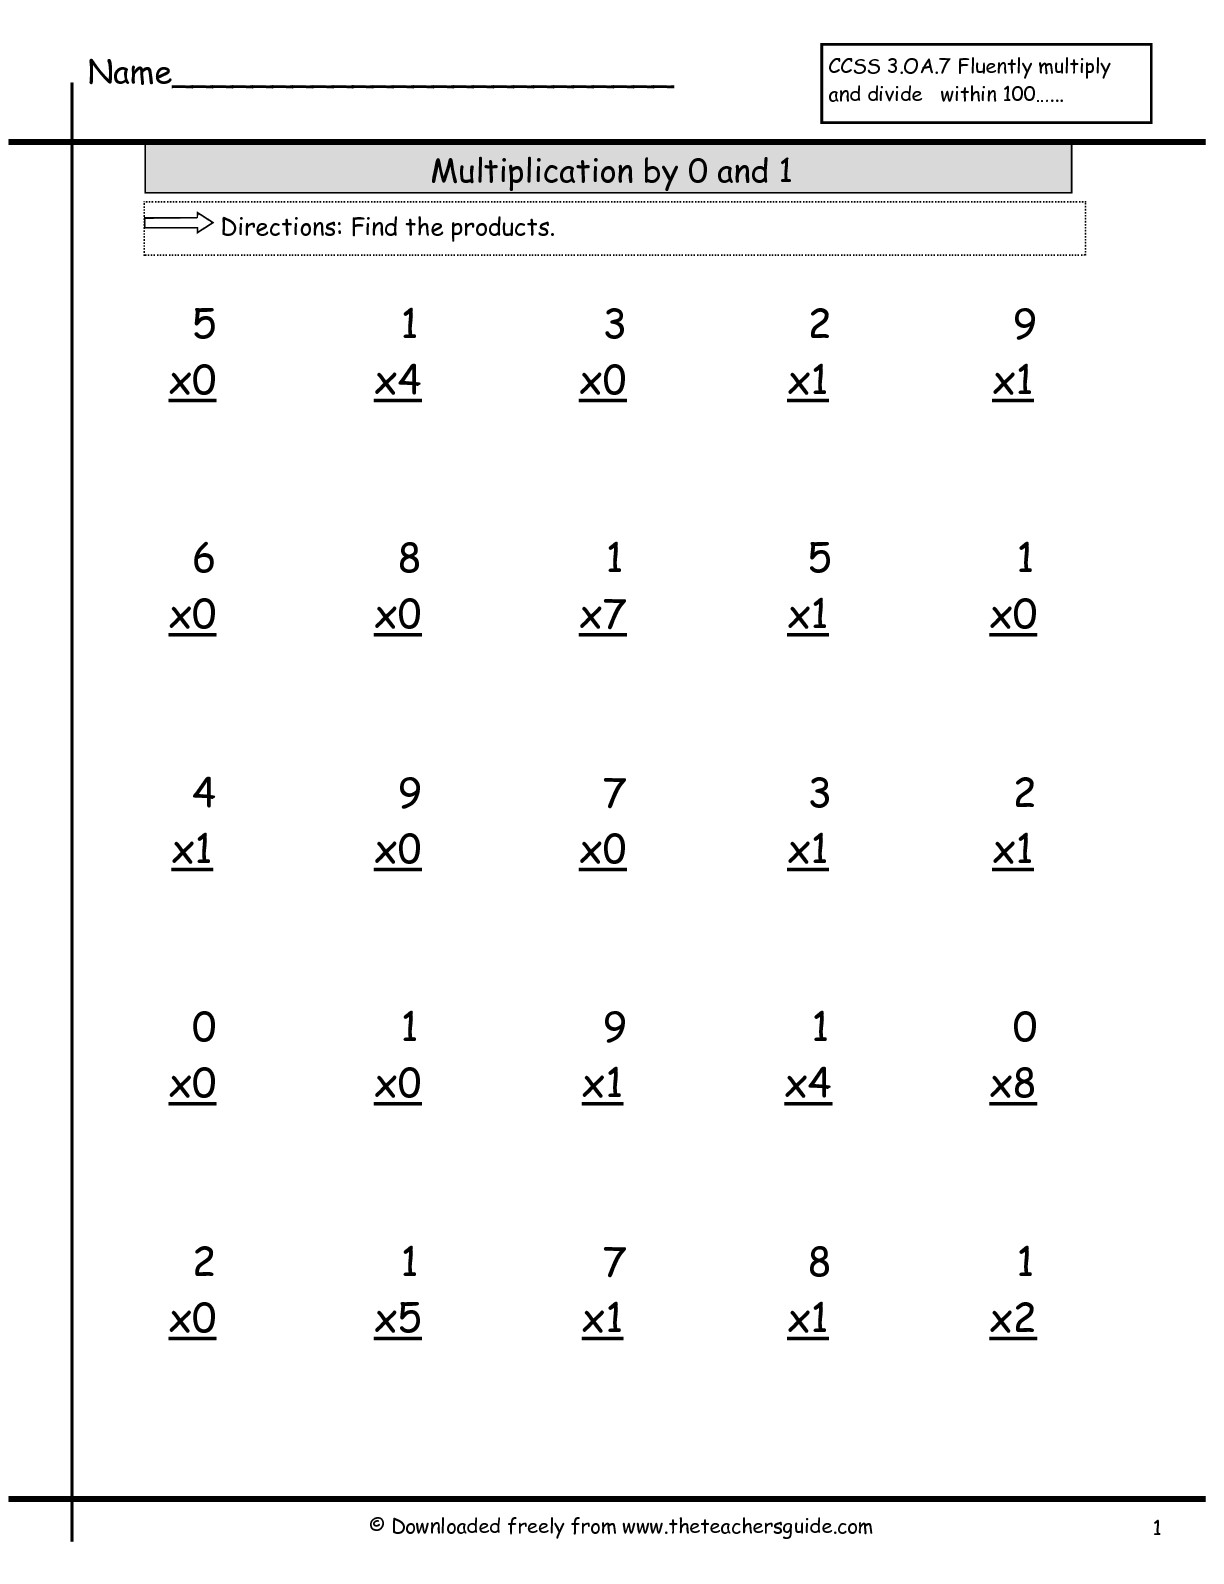 Multiplication Facts Worksheets From The Teacher's Guide in Printable Multiplication Worksheets 0-5